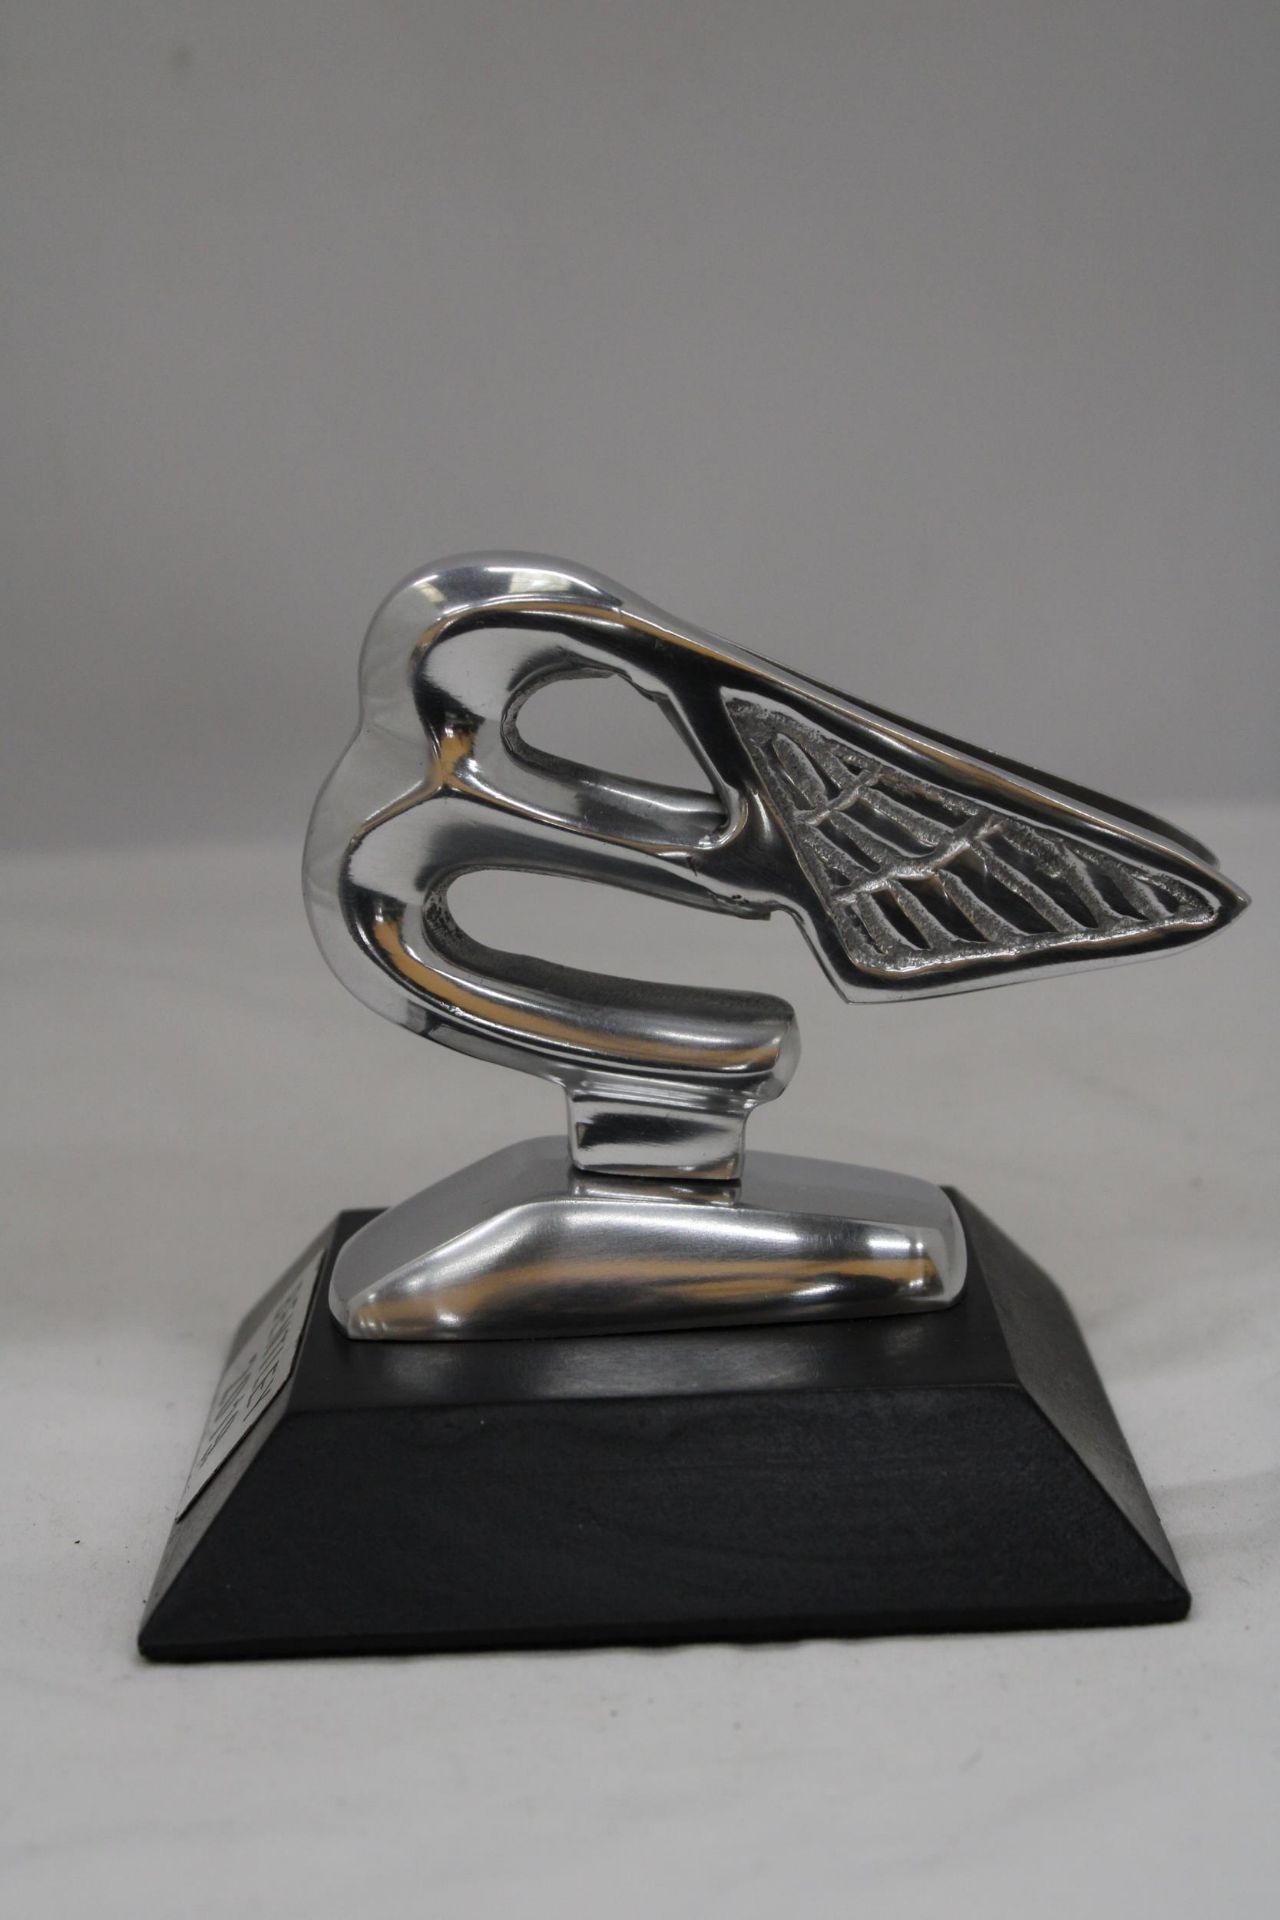 A 2019, CHROME BENTLEY 'B' ON A BASE, HEIGHT APPROX 13CM - Image 4 of 5